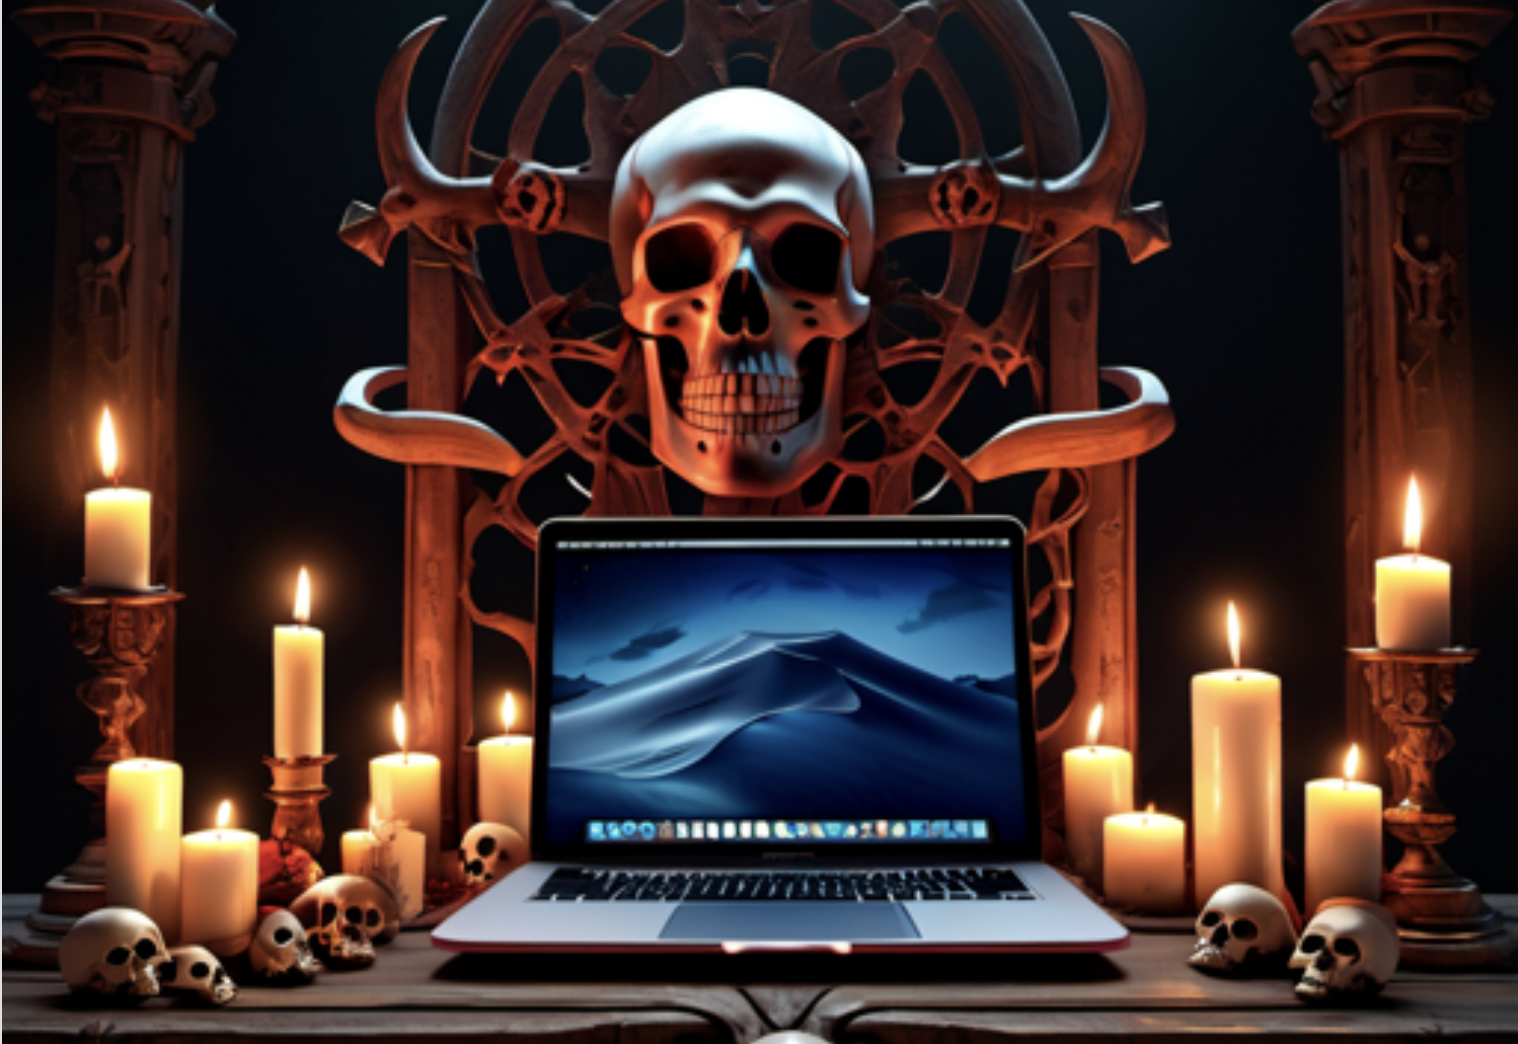 A Macbook Air sitting int he middle of a satanic alter, surrounded by candles and ornamental skulls